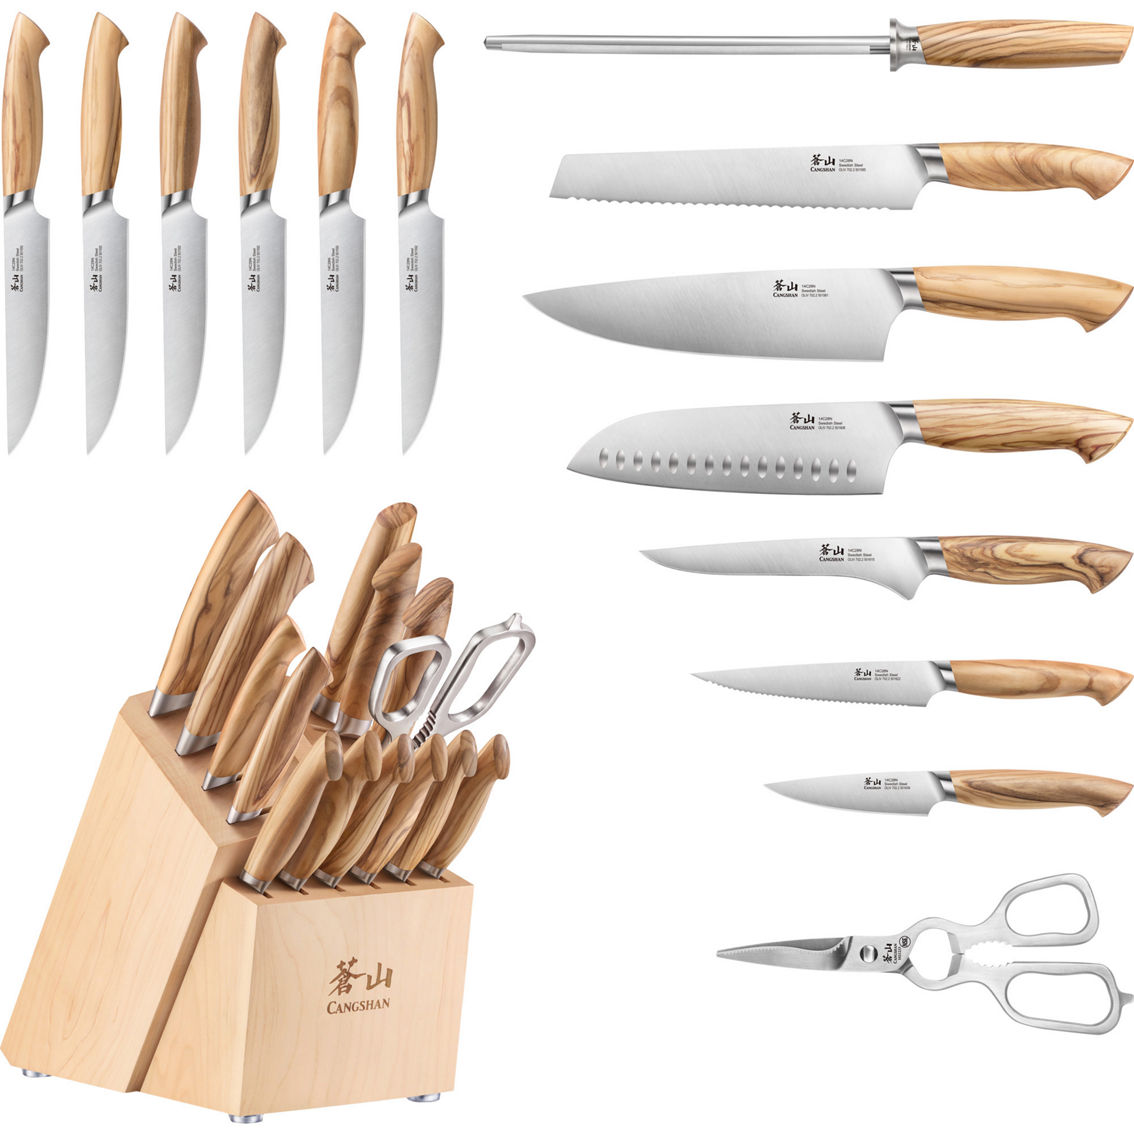 Cangshan Cutlery Oliv Series Forged 15 pc. Knife Block Set - Image 2 of 6